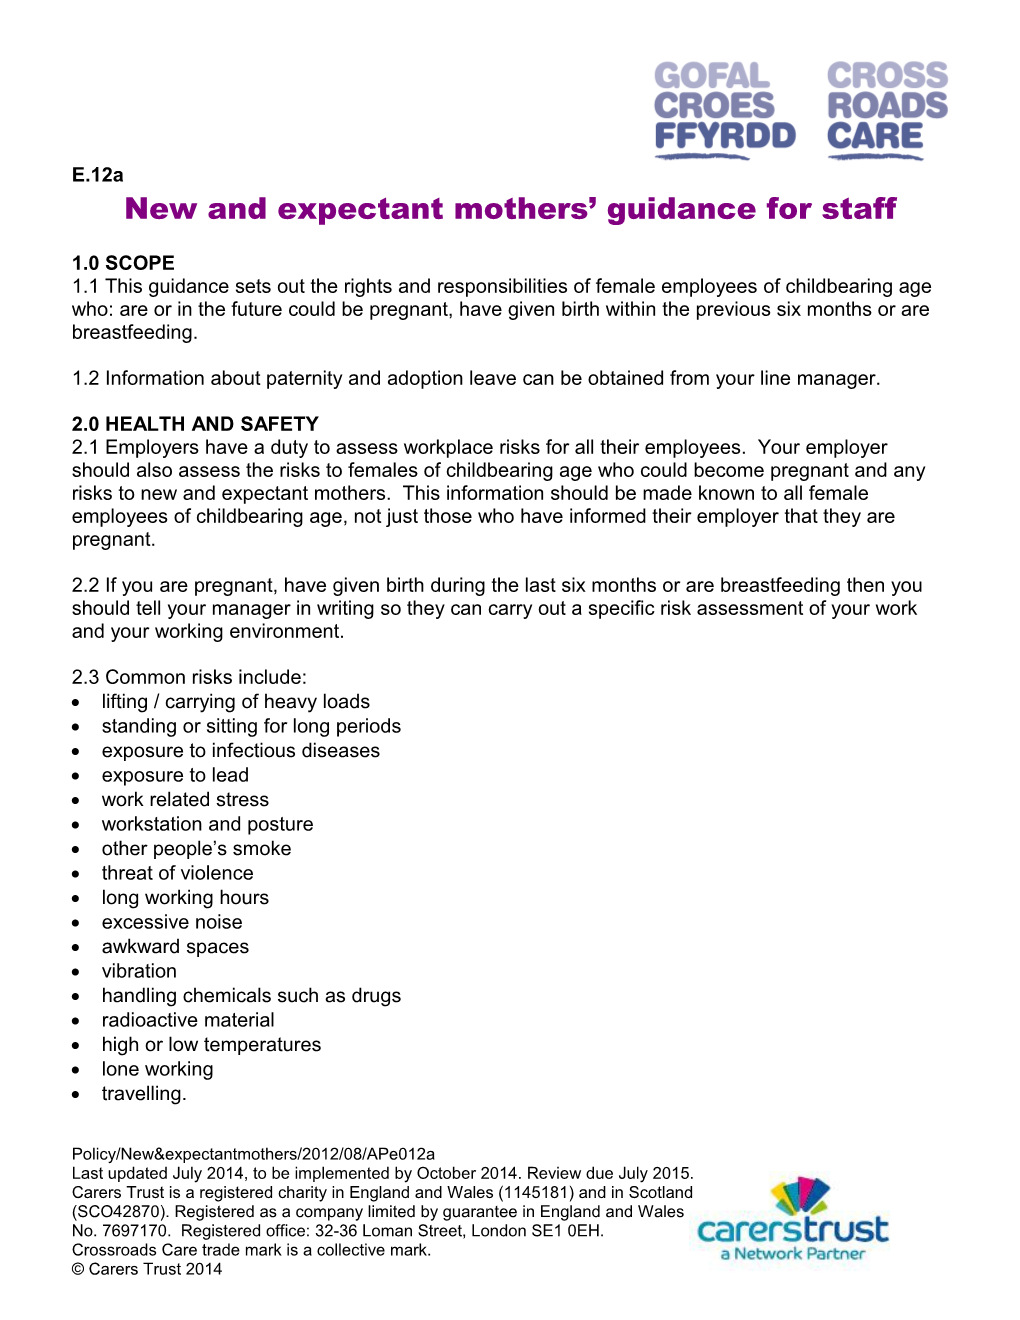 New and Expectant Mothers Guidance for Staff